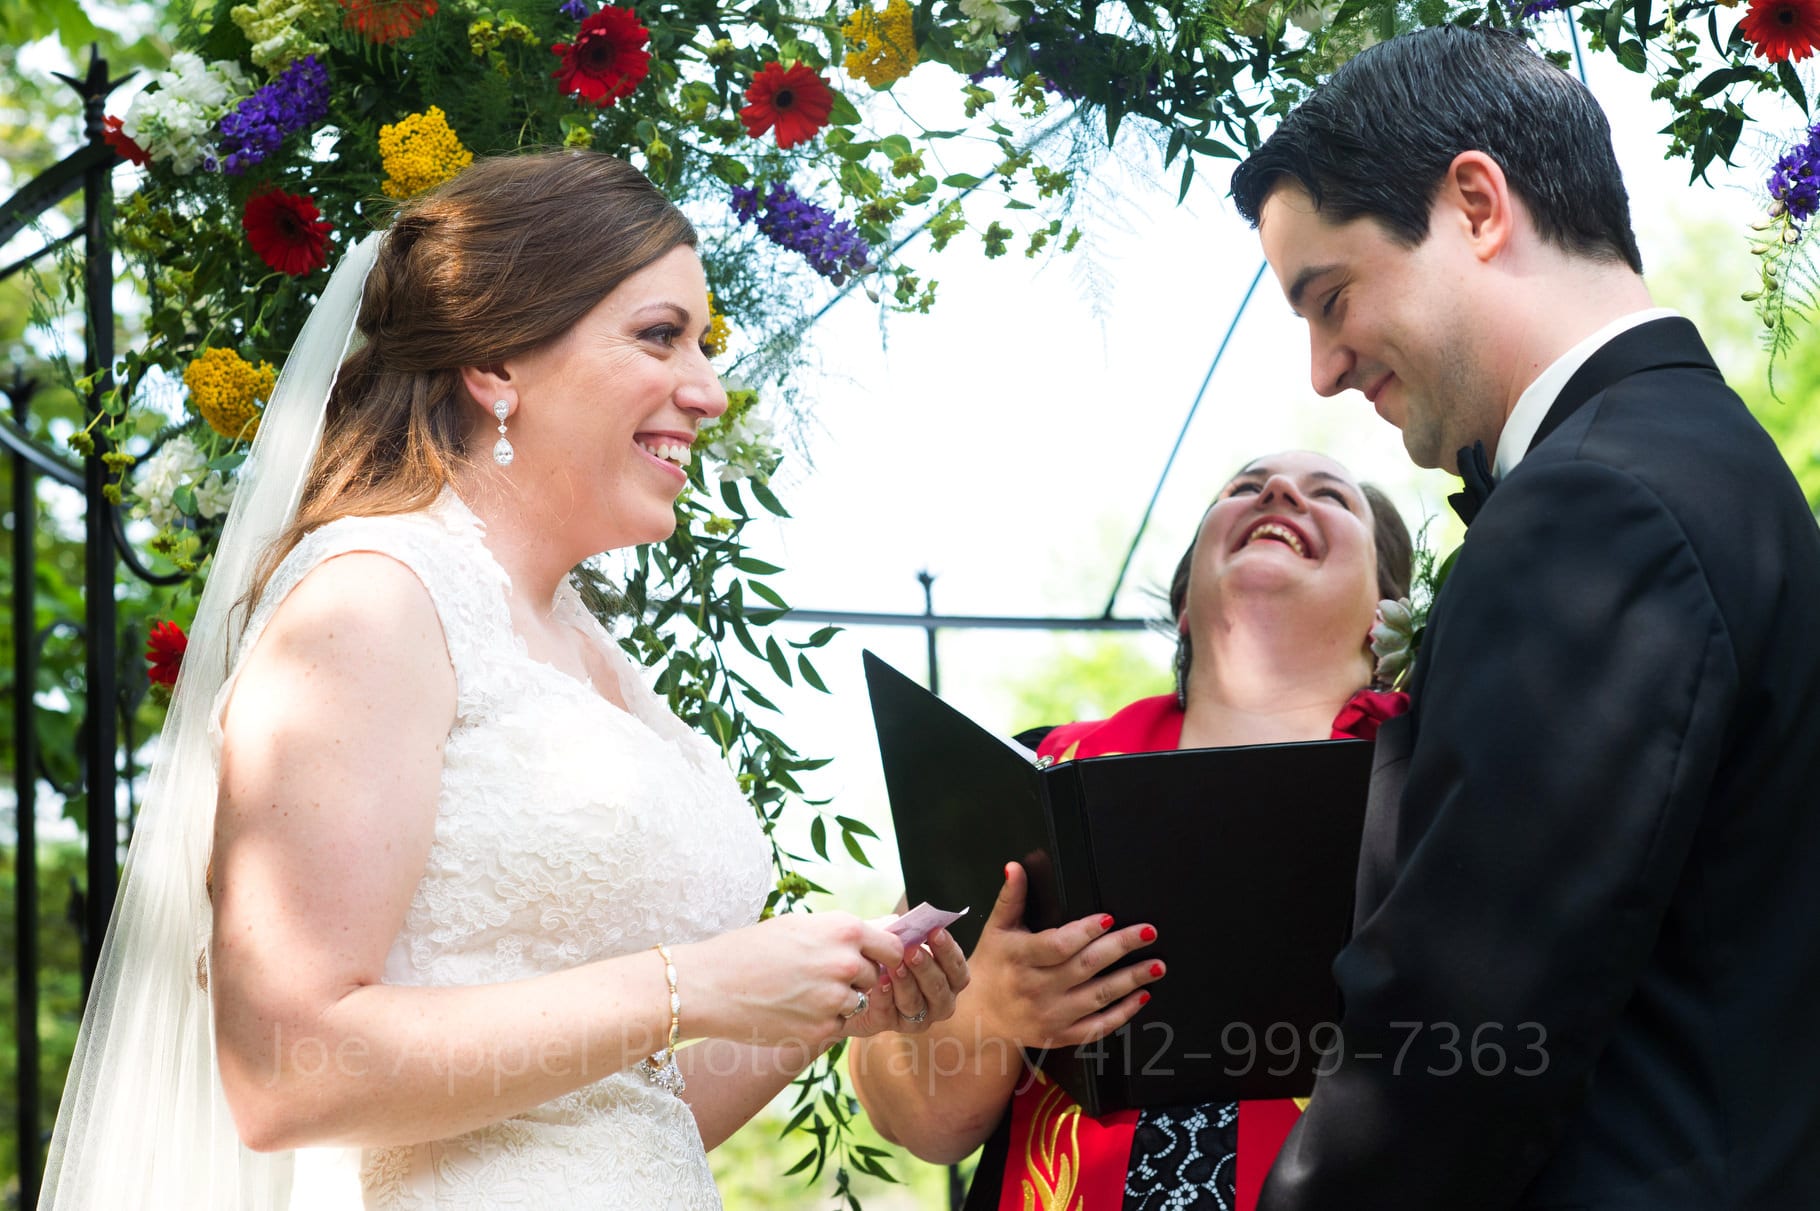 Bride and groom smile as they speak their vows to one another as the officiant rears back her head in laughter during their Chanteclaire Farm Wedding.